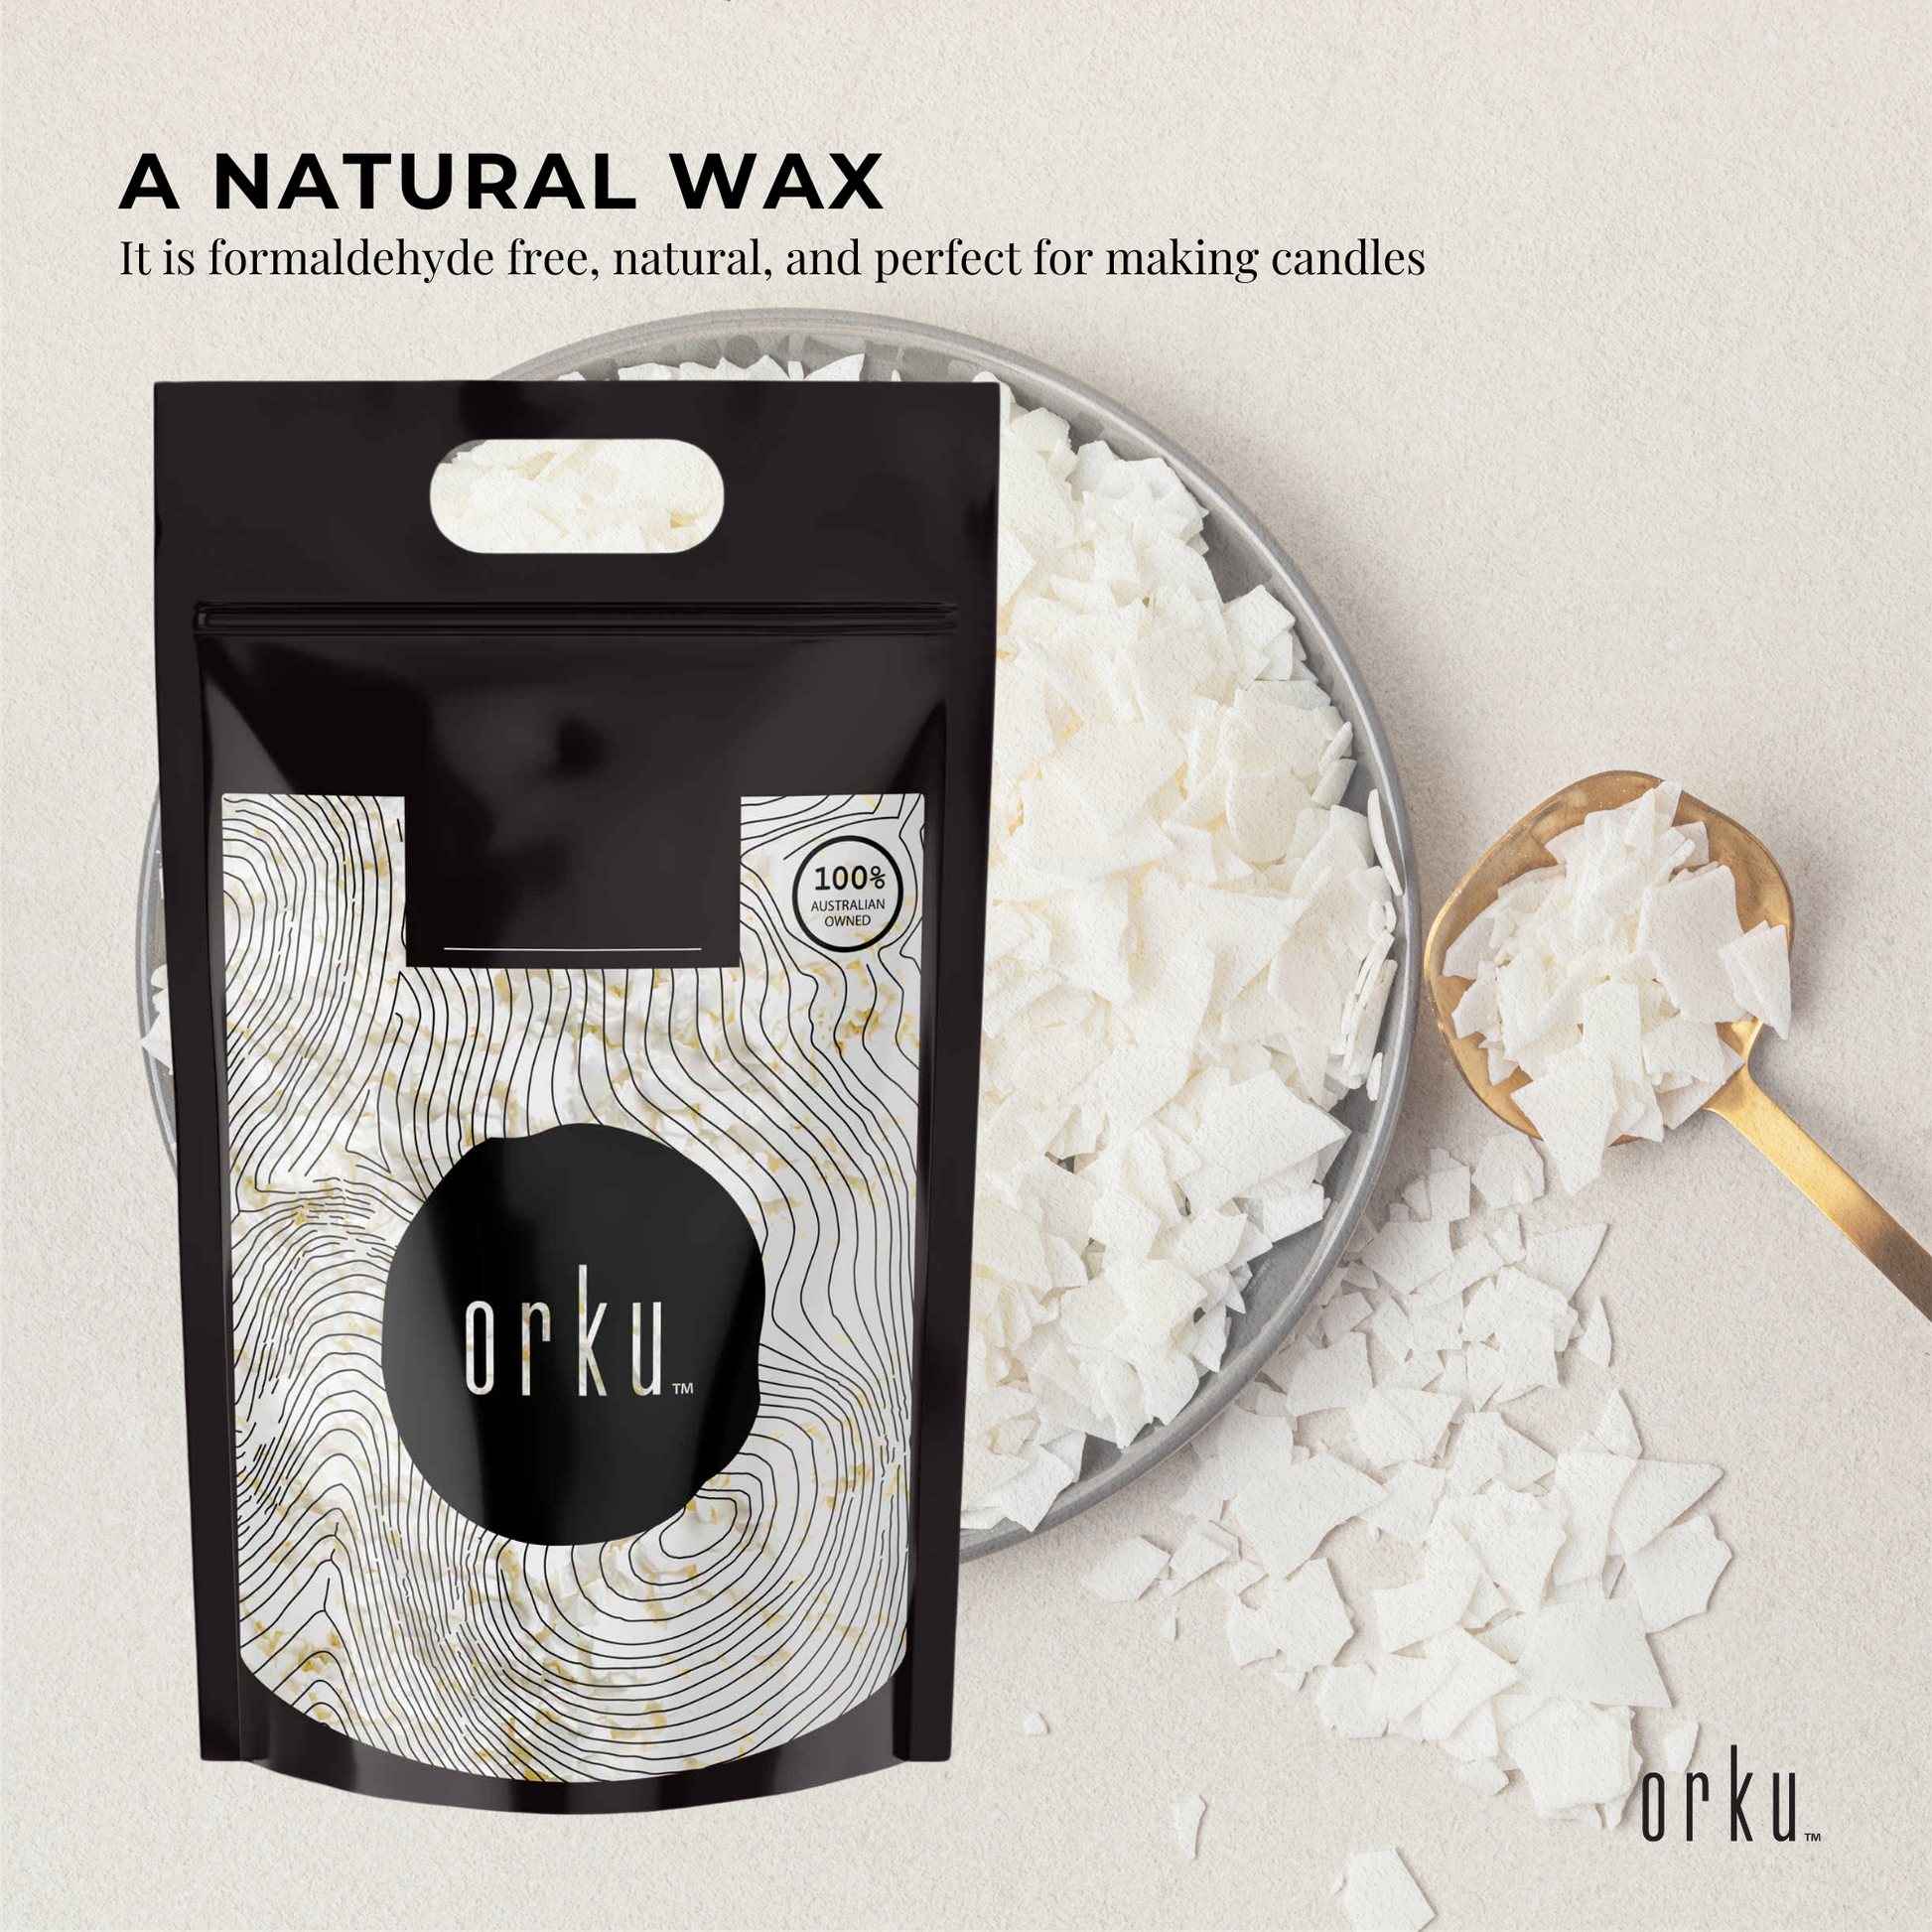 5Kg Golden 464 Soy Wax Flakes - 100% Pure Natural DIY Candle Melts Chips